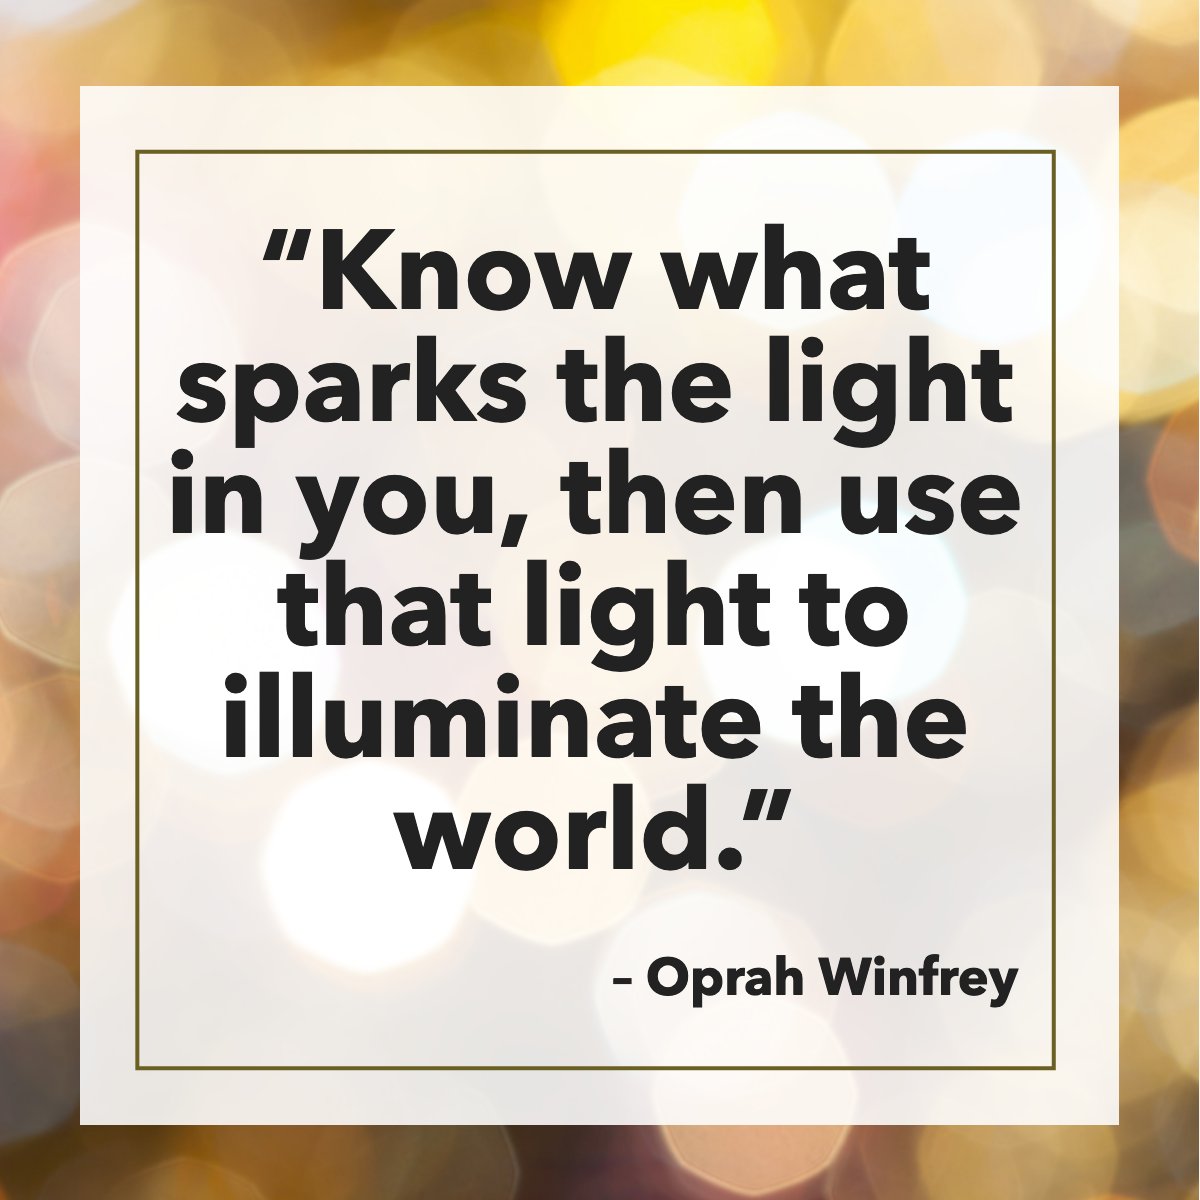 It's always important to know the things that make you feel better

#quotegram #quoteoftheday✏️ #oprahwinfrey  #dreams💭